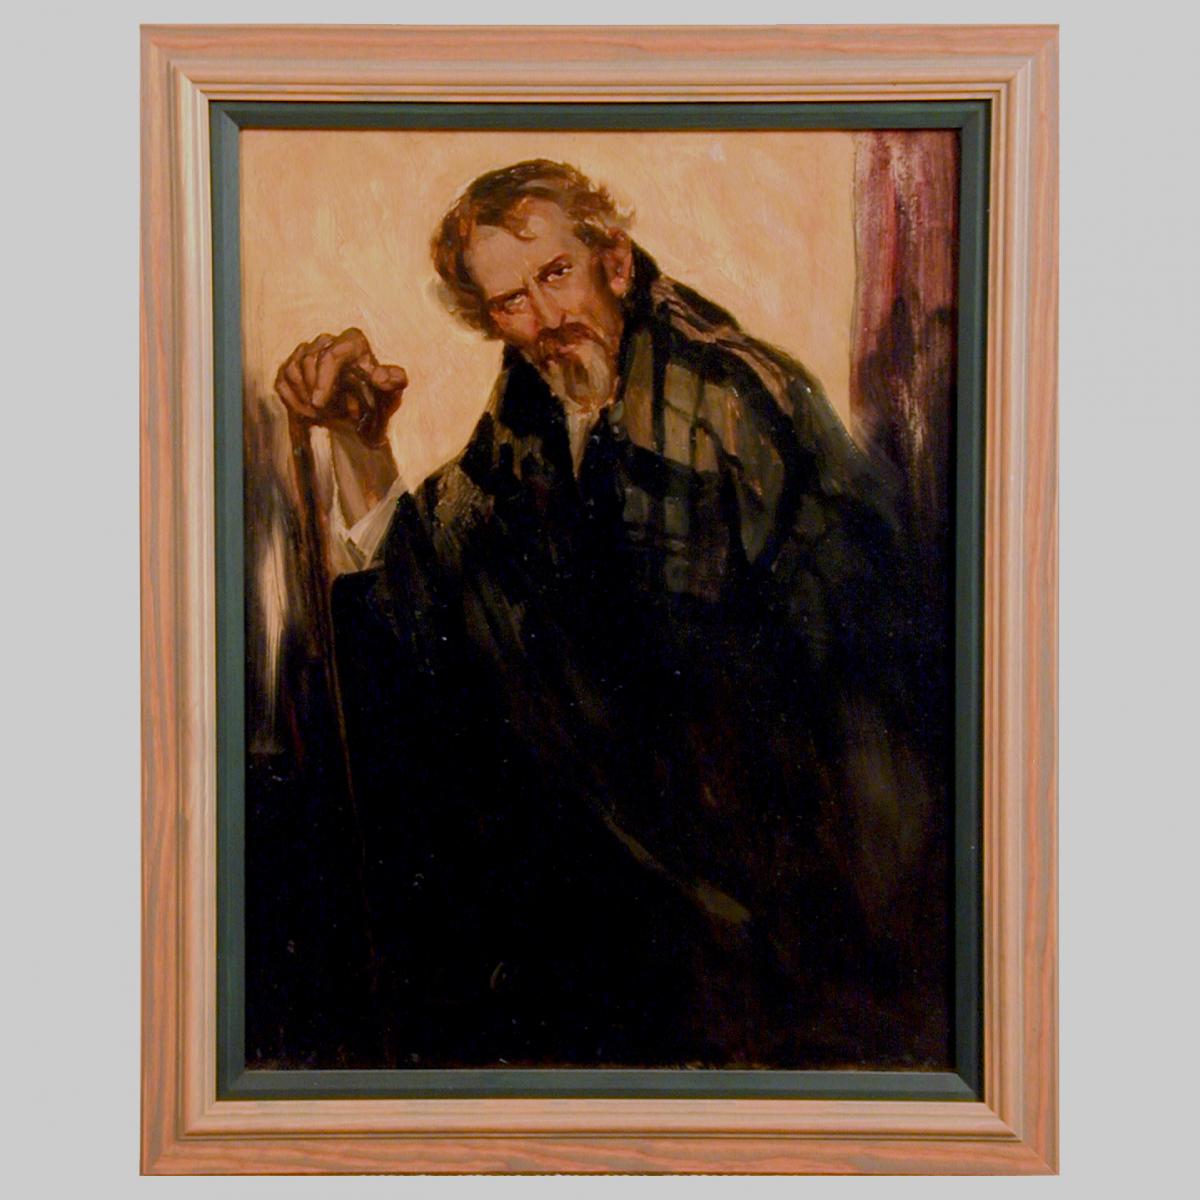 20th century oil painting portrait by T. Alfred West, The Old Shepherd